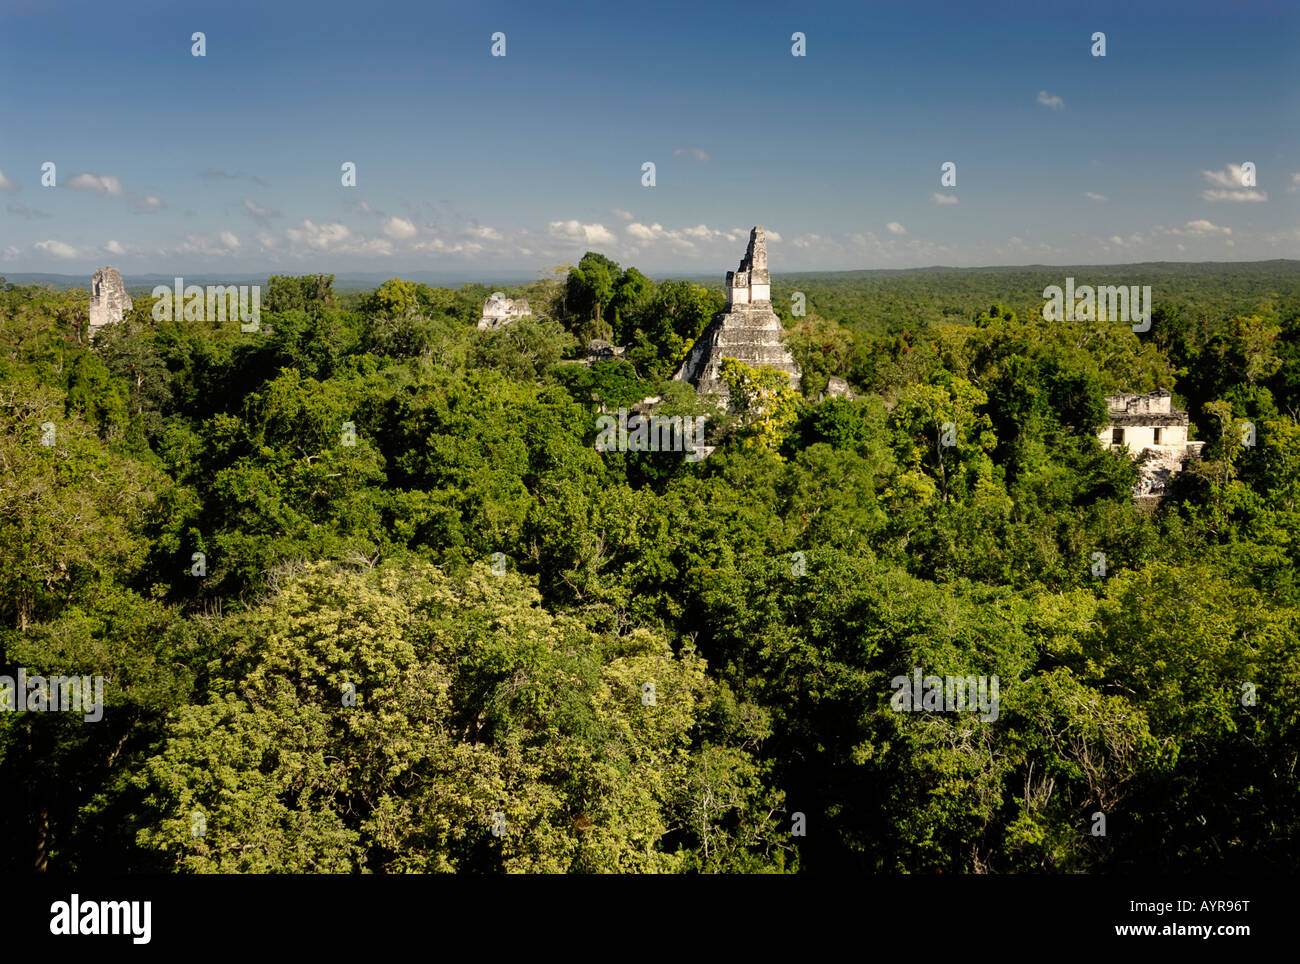 Mayan ruins of Tikal - View from Temple III to Temple I, Temple of the Giant Jaguar, and II, Yucatan, Guatemala, Central America Stock Photo